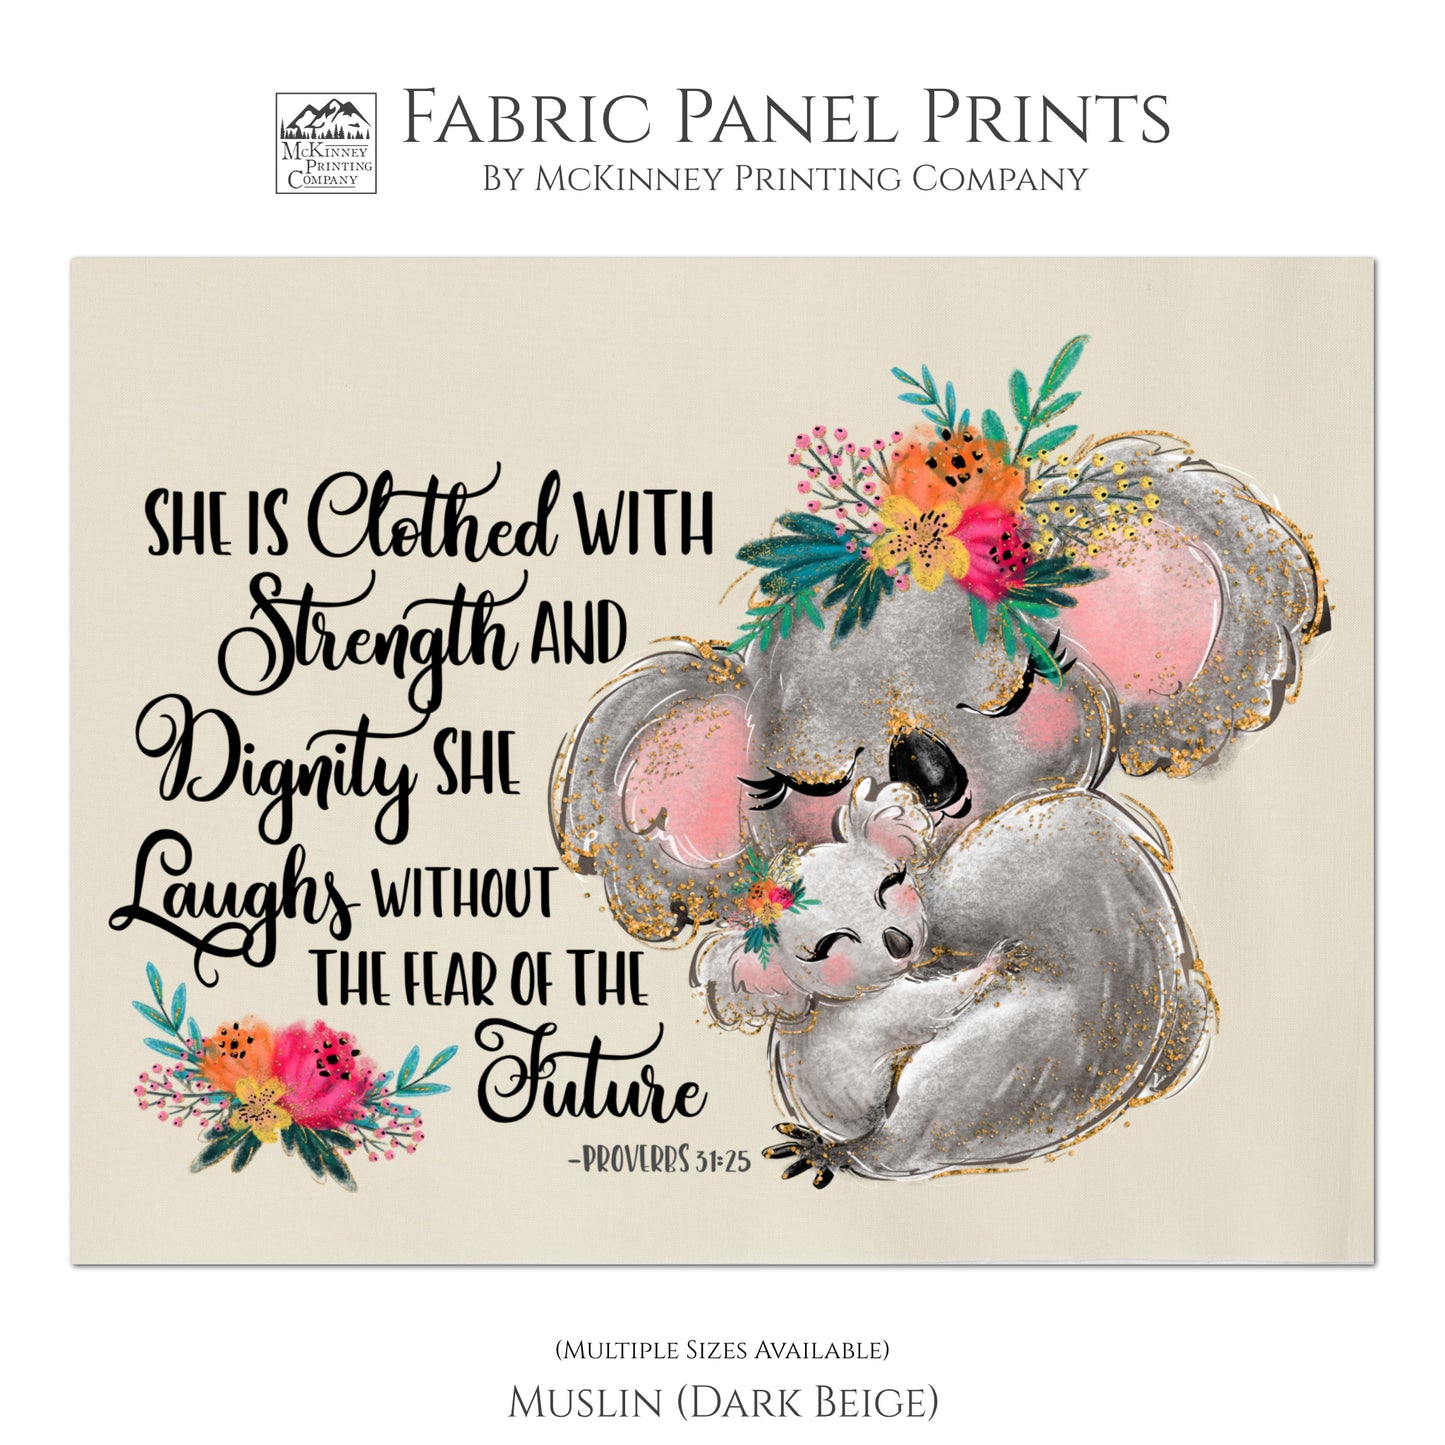 She is clothed with strength and dignity, she laughs without the fear of the future. - Proverbs 31:25 - Baby Fabric Panels, Quilt Block, Fabric Panel Print - Muslin